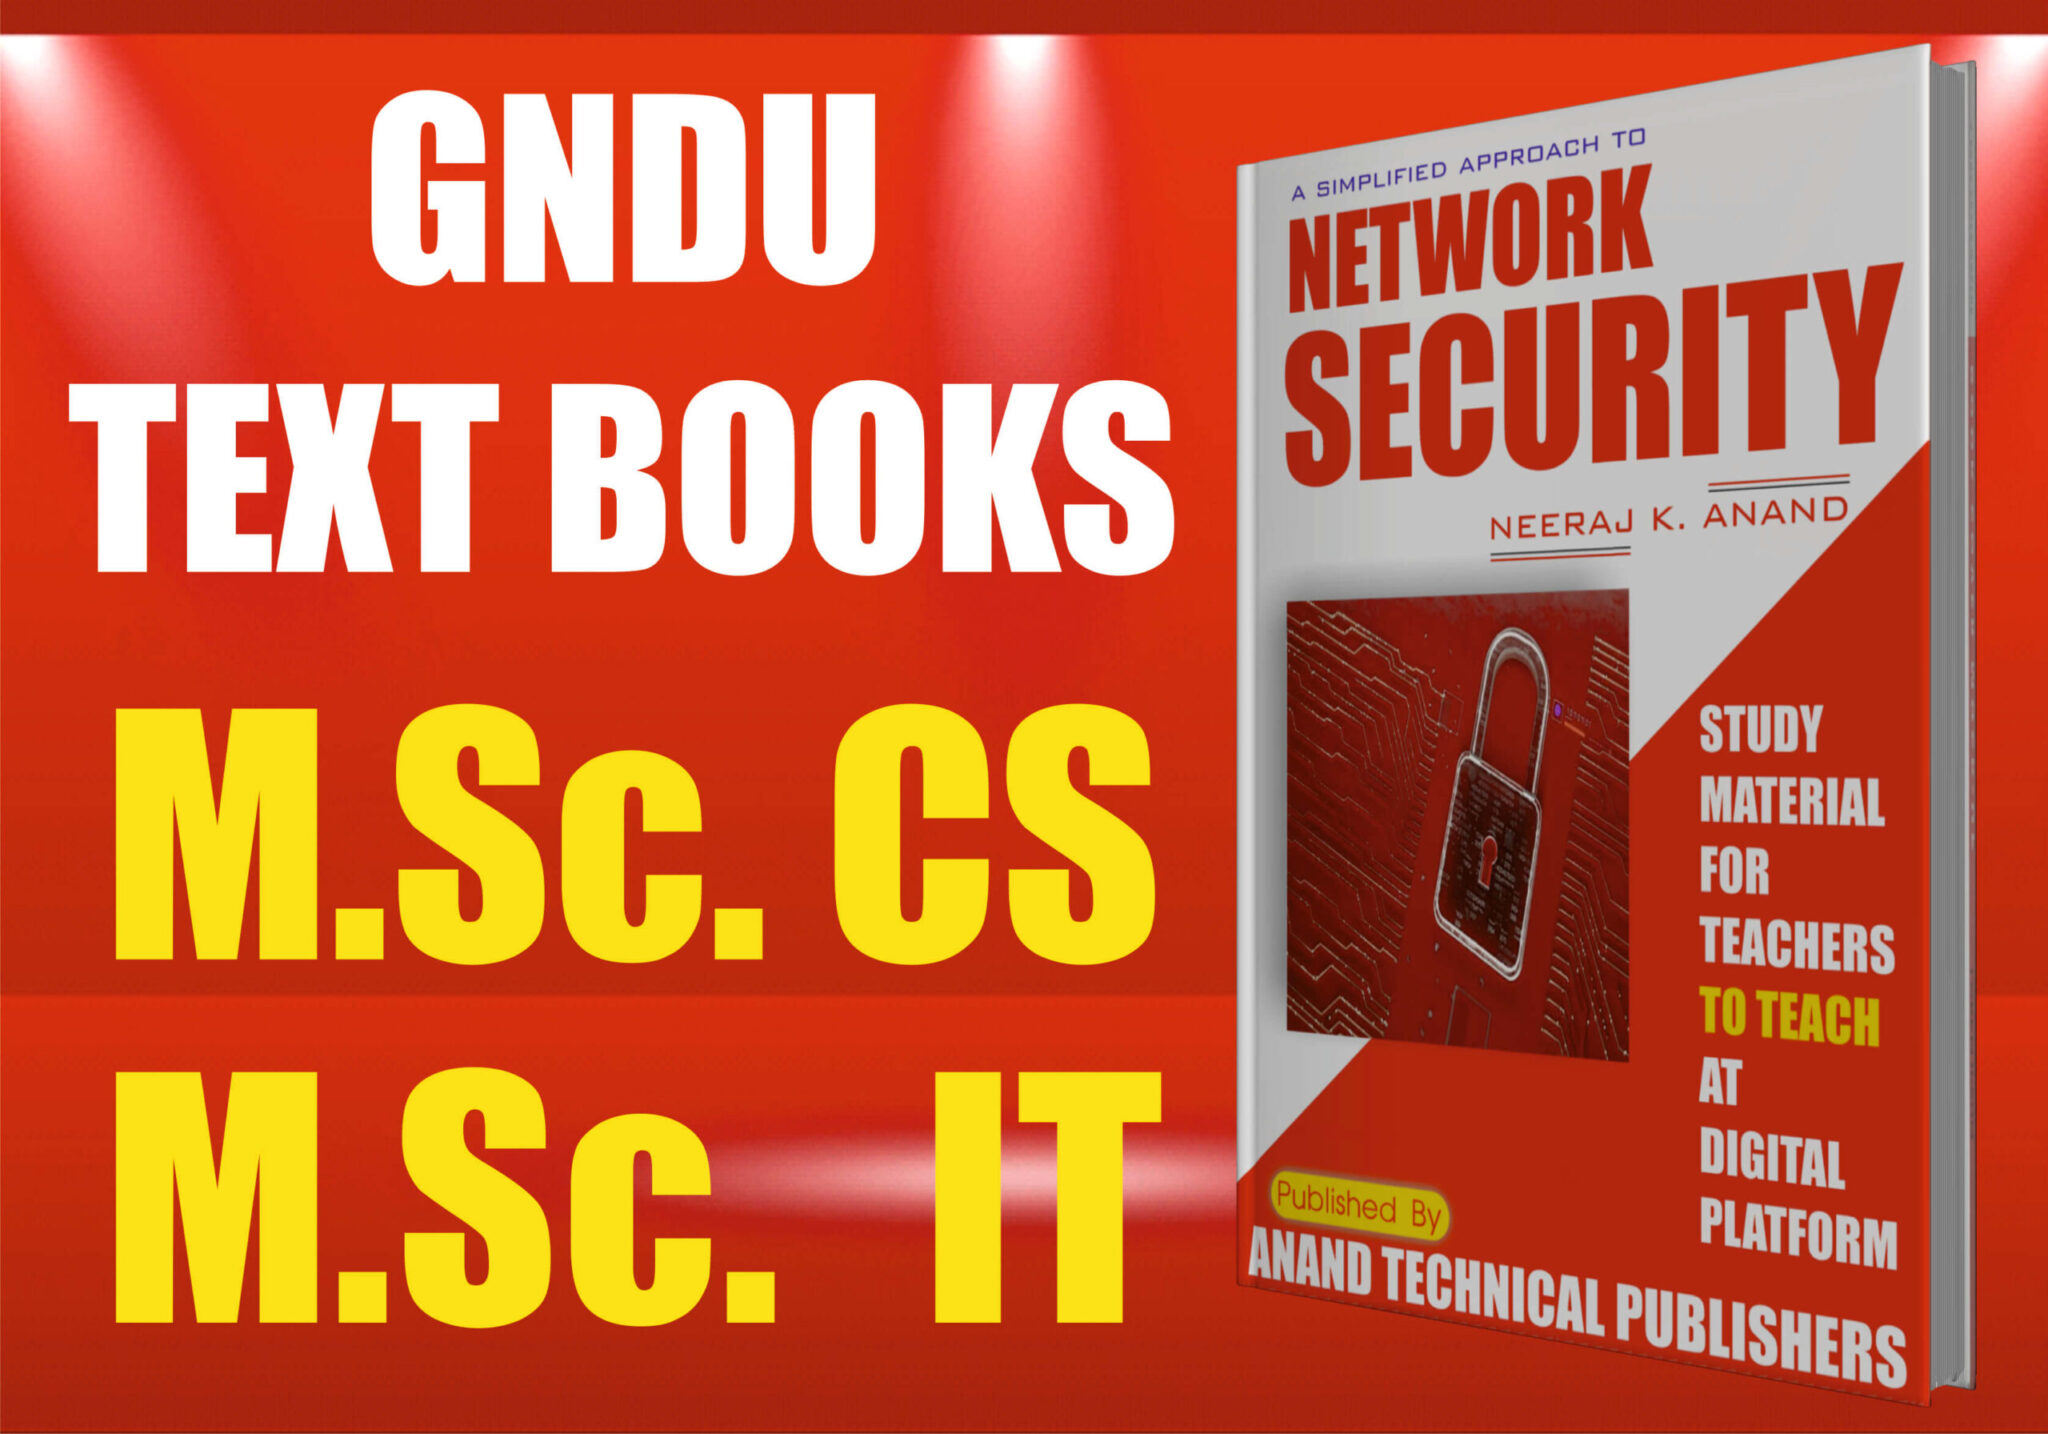 Network Security|Introduction To Network Security|GNDU Msc IT Study Material Lecture Notes Ebook pdf Download|Neeraj K Anand||Anand Technical Publishers